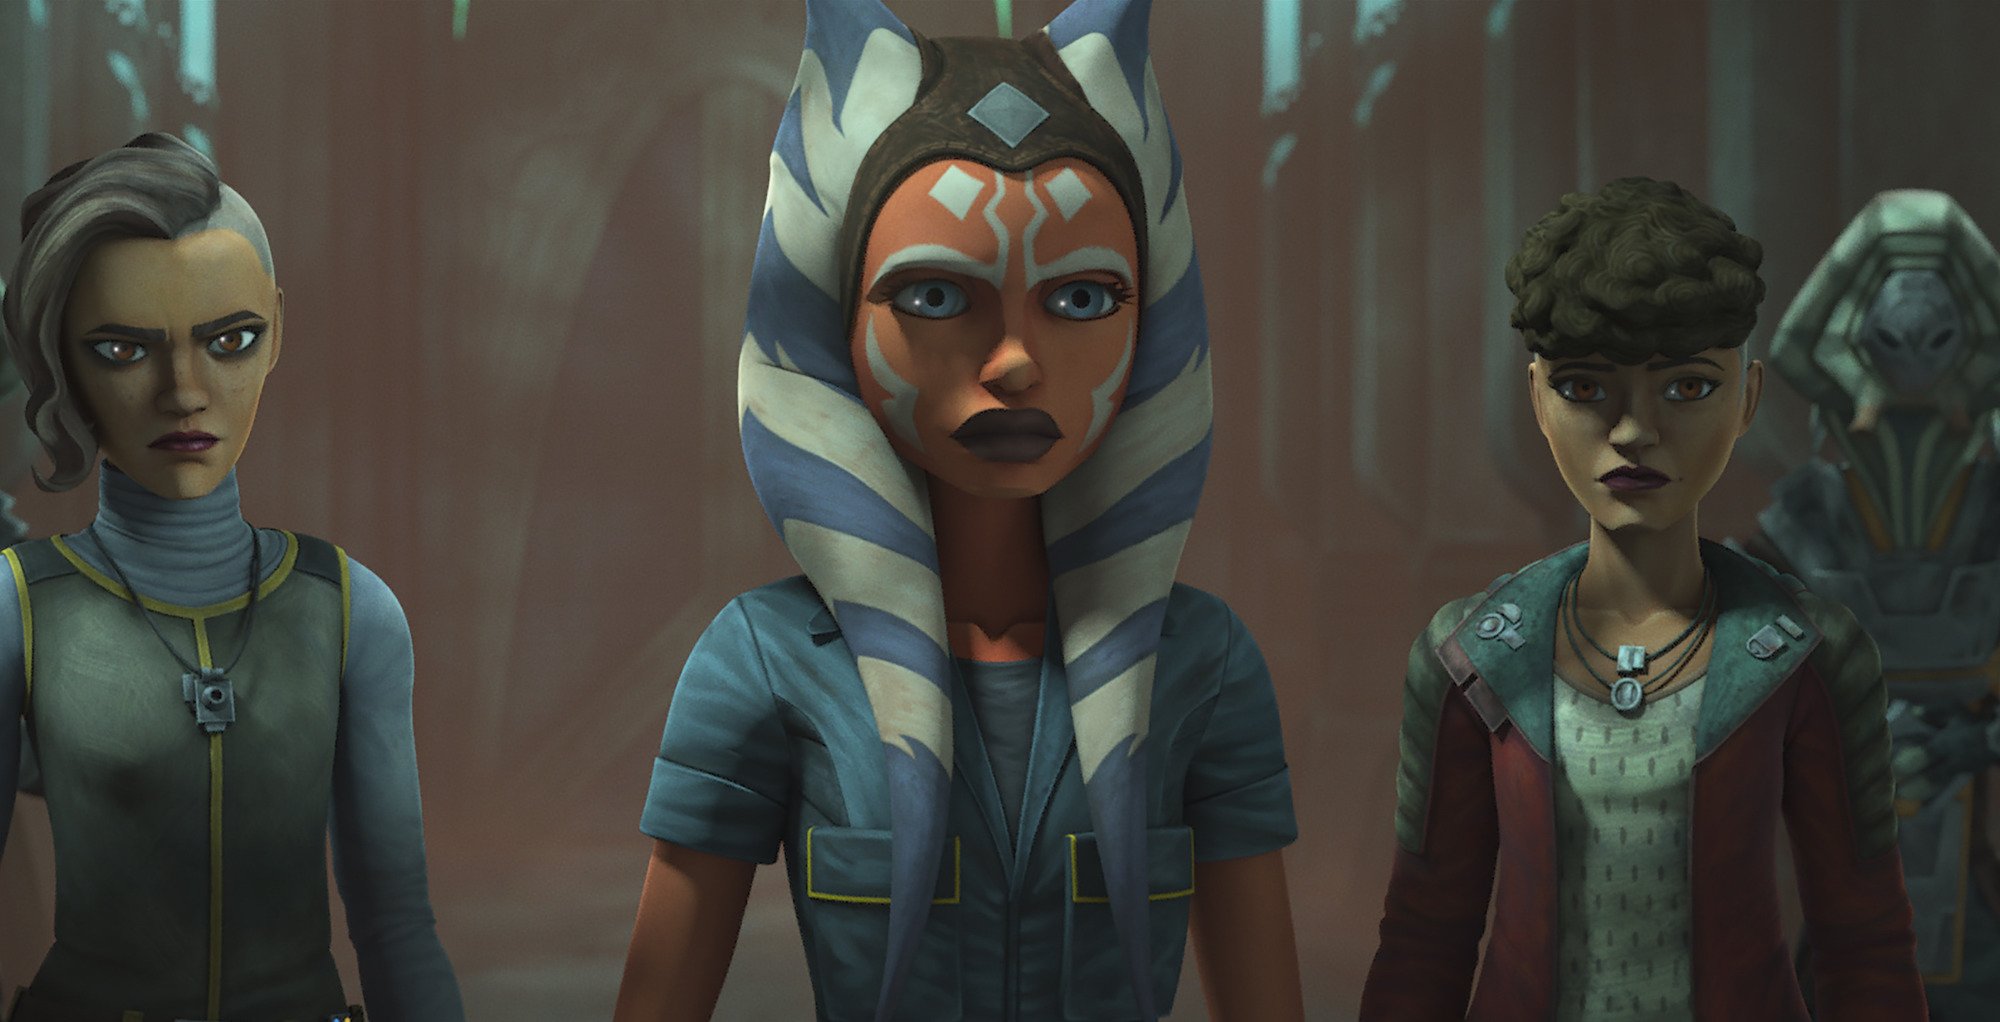 Did Ahsoka Tano Ever Have a Love Interest? It Got Close, Especially in Early Drafts of ‘The Clone Wars’ Last Seasons